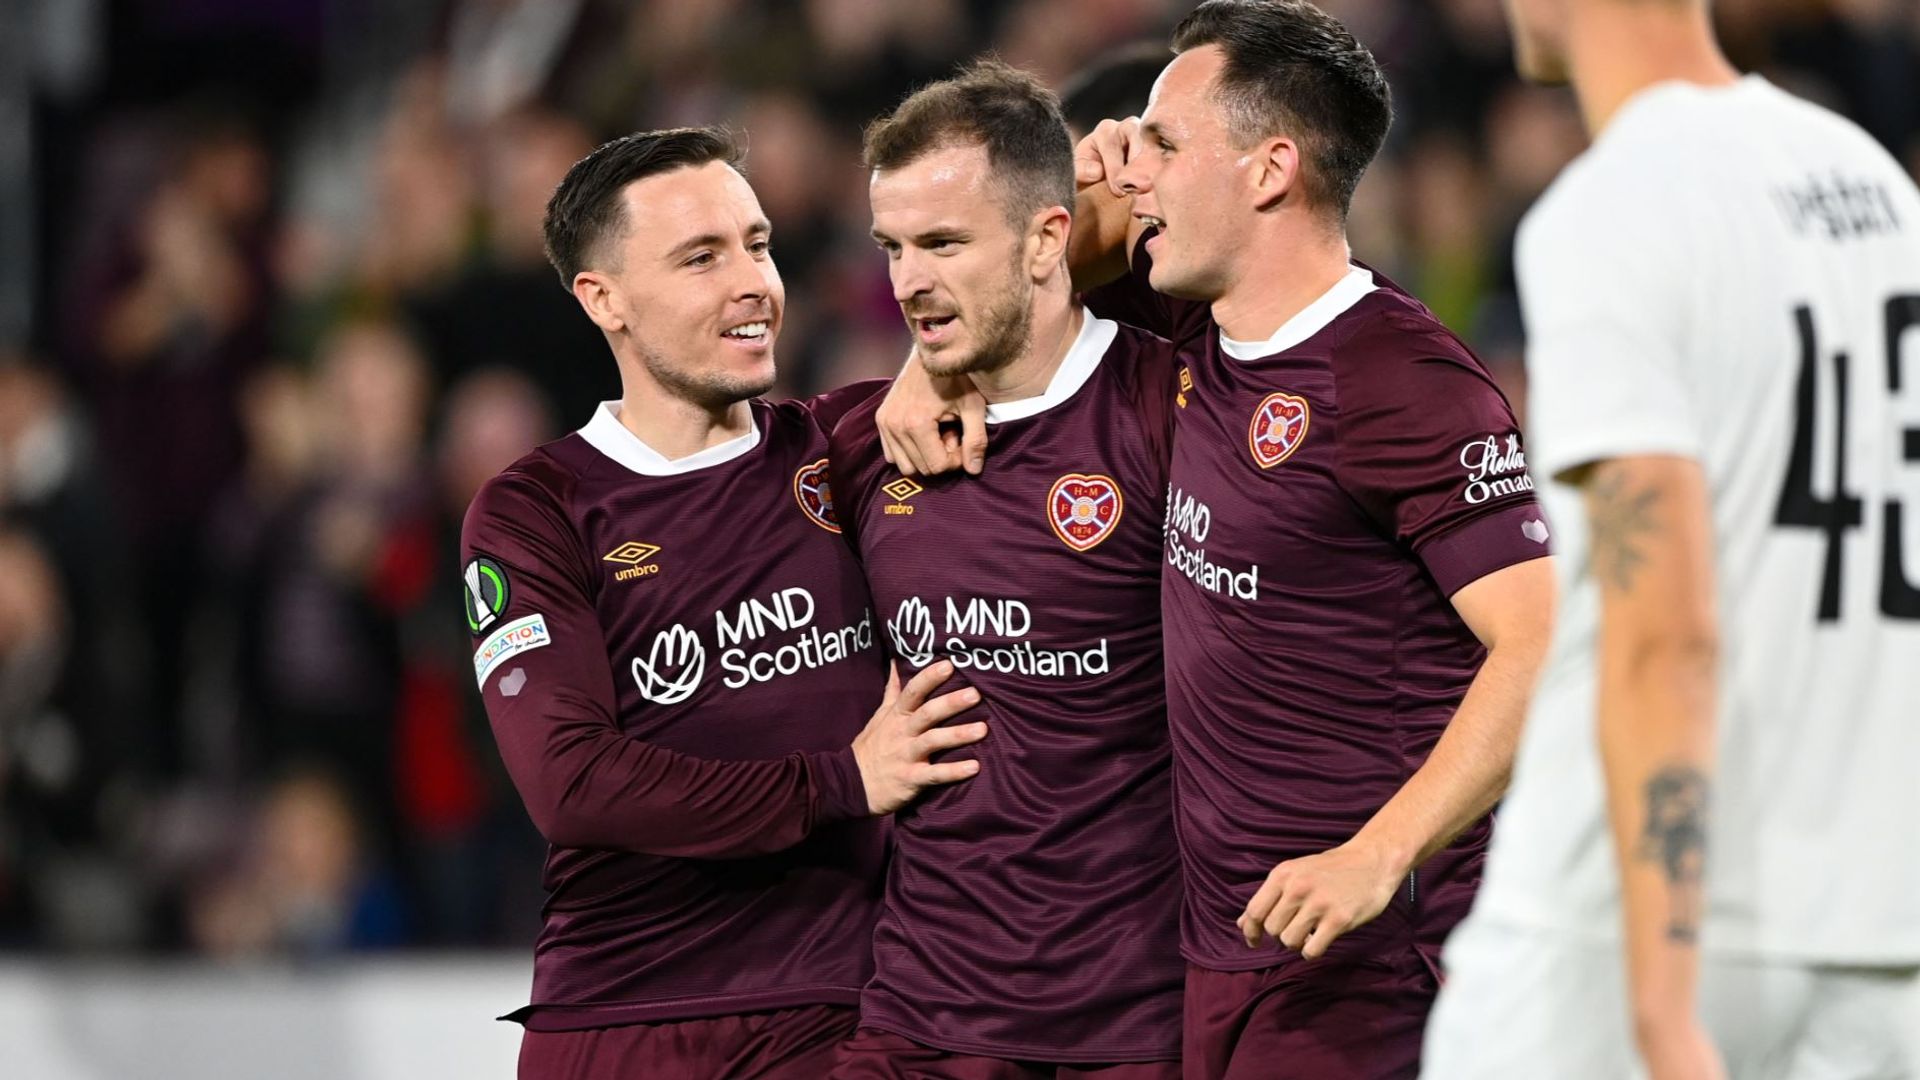 Hearts 2-1 Rigas Futbola Skola: Jambos finish third in Europa Conference League Group A